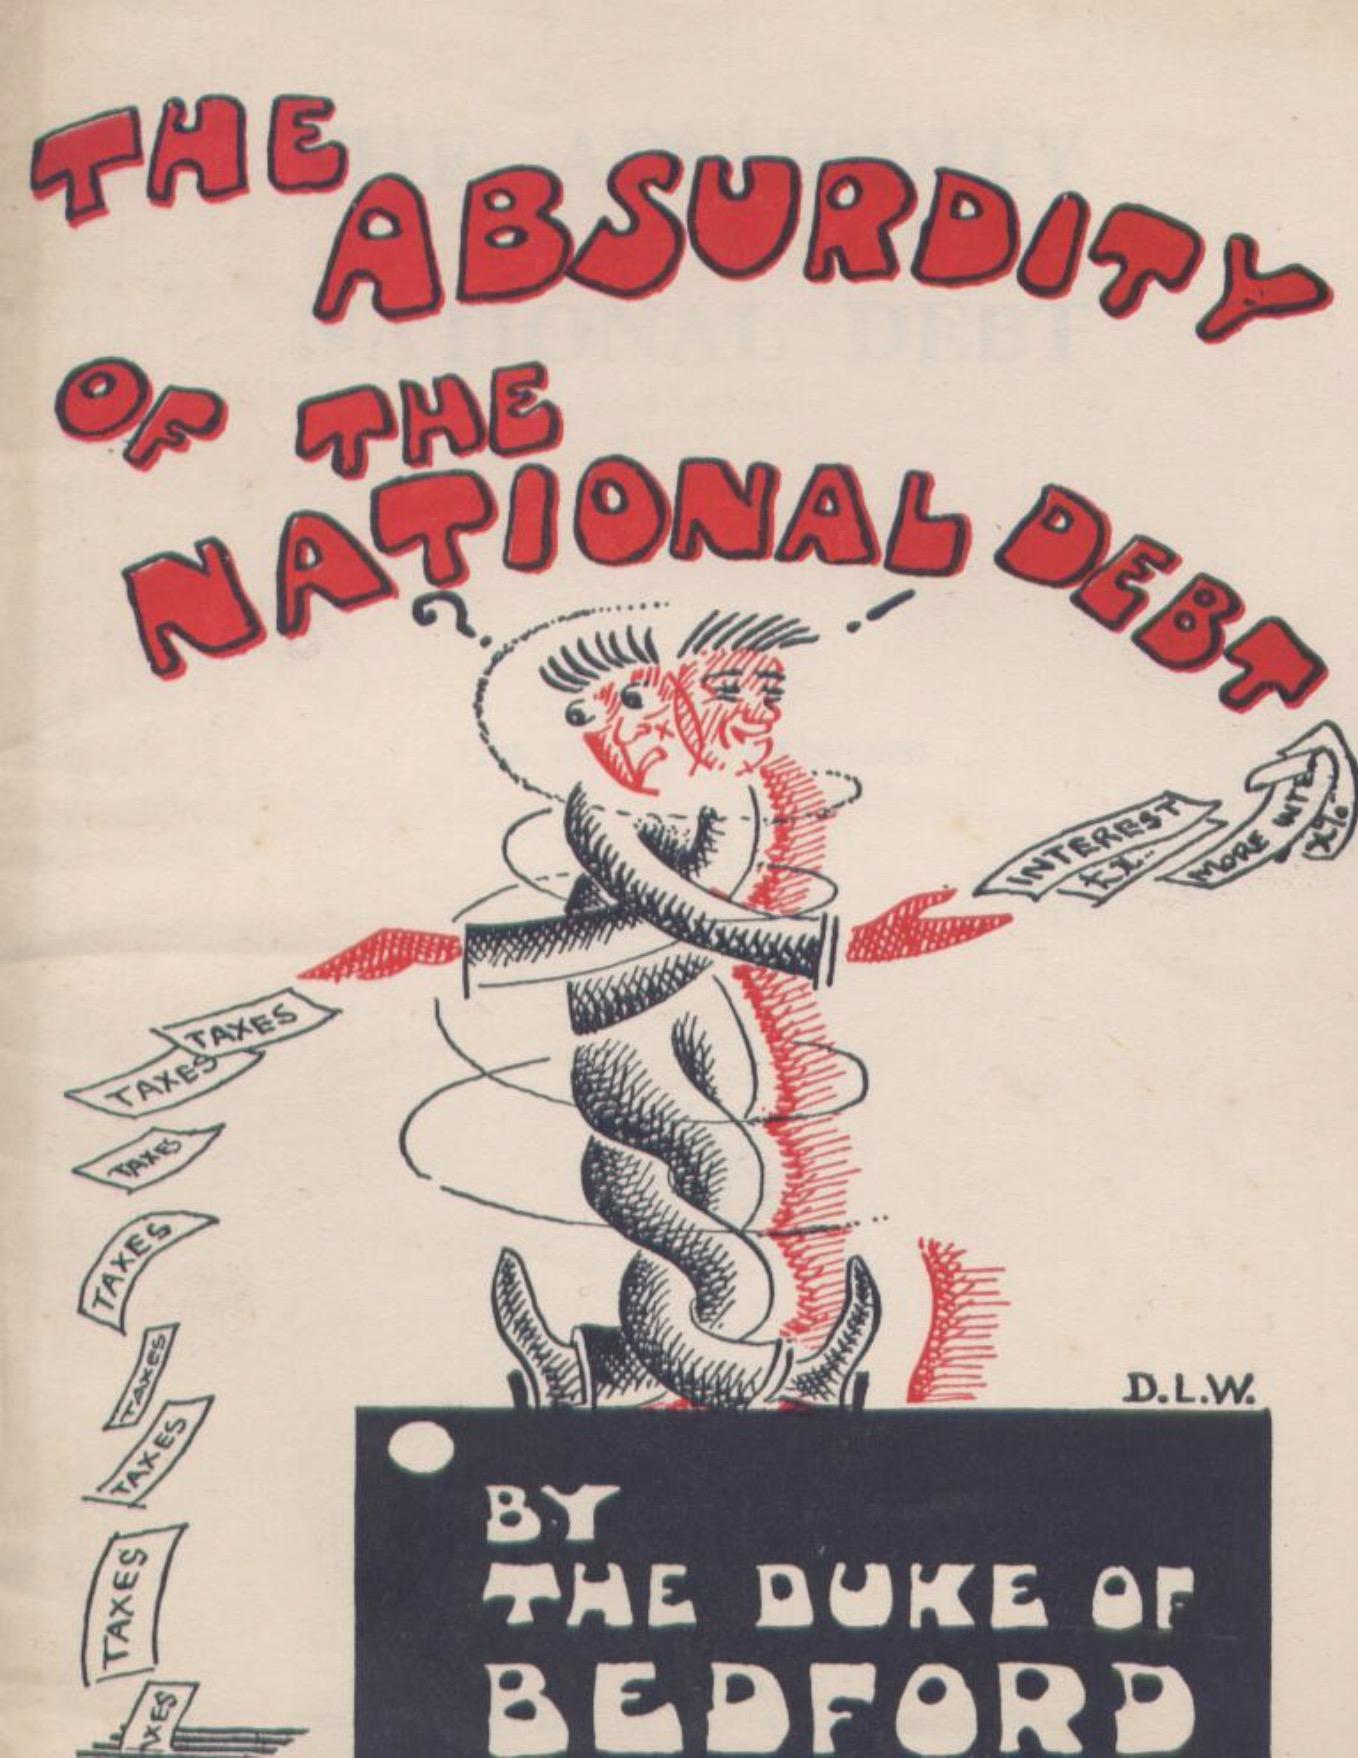 The Absurdity of The National Debt (1947) by Hastings Russell, The 12th Duke of Bedford, 1888-1953